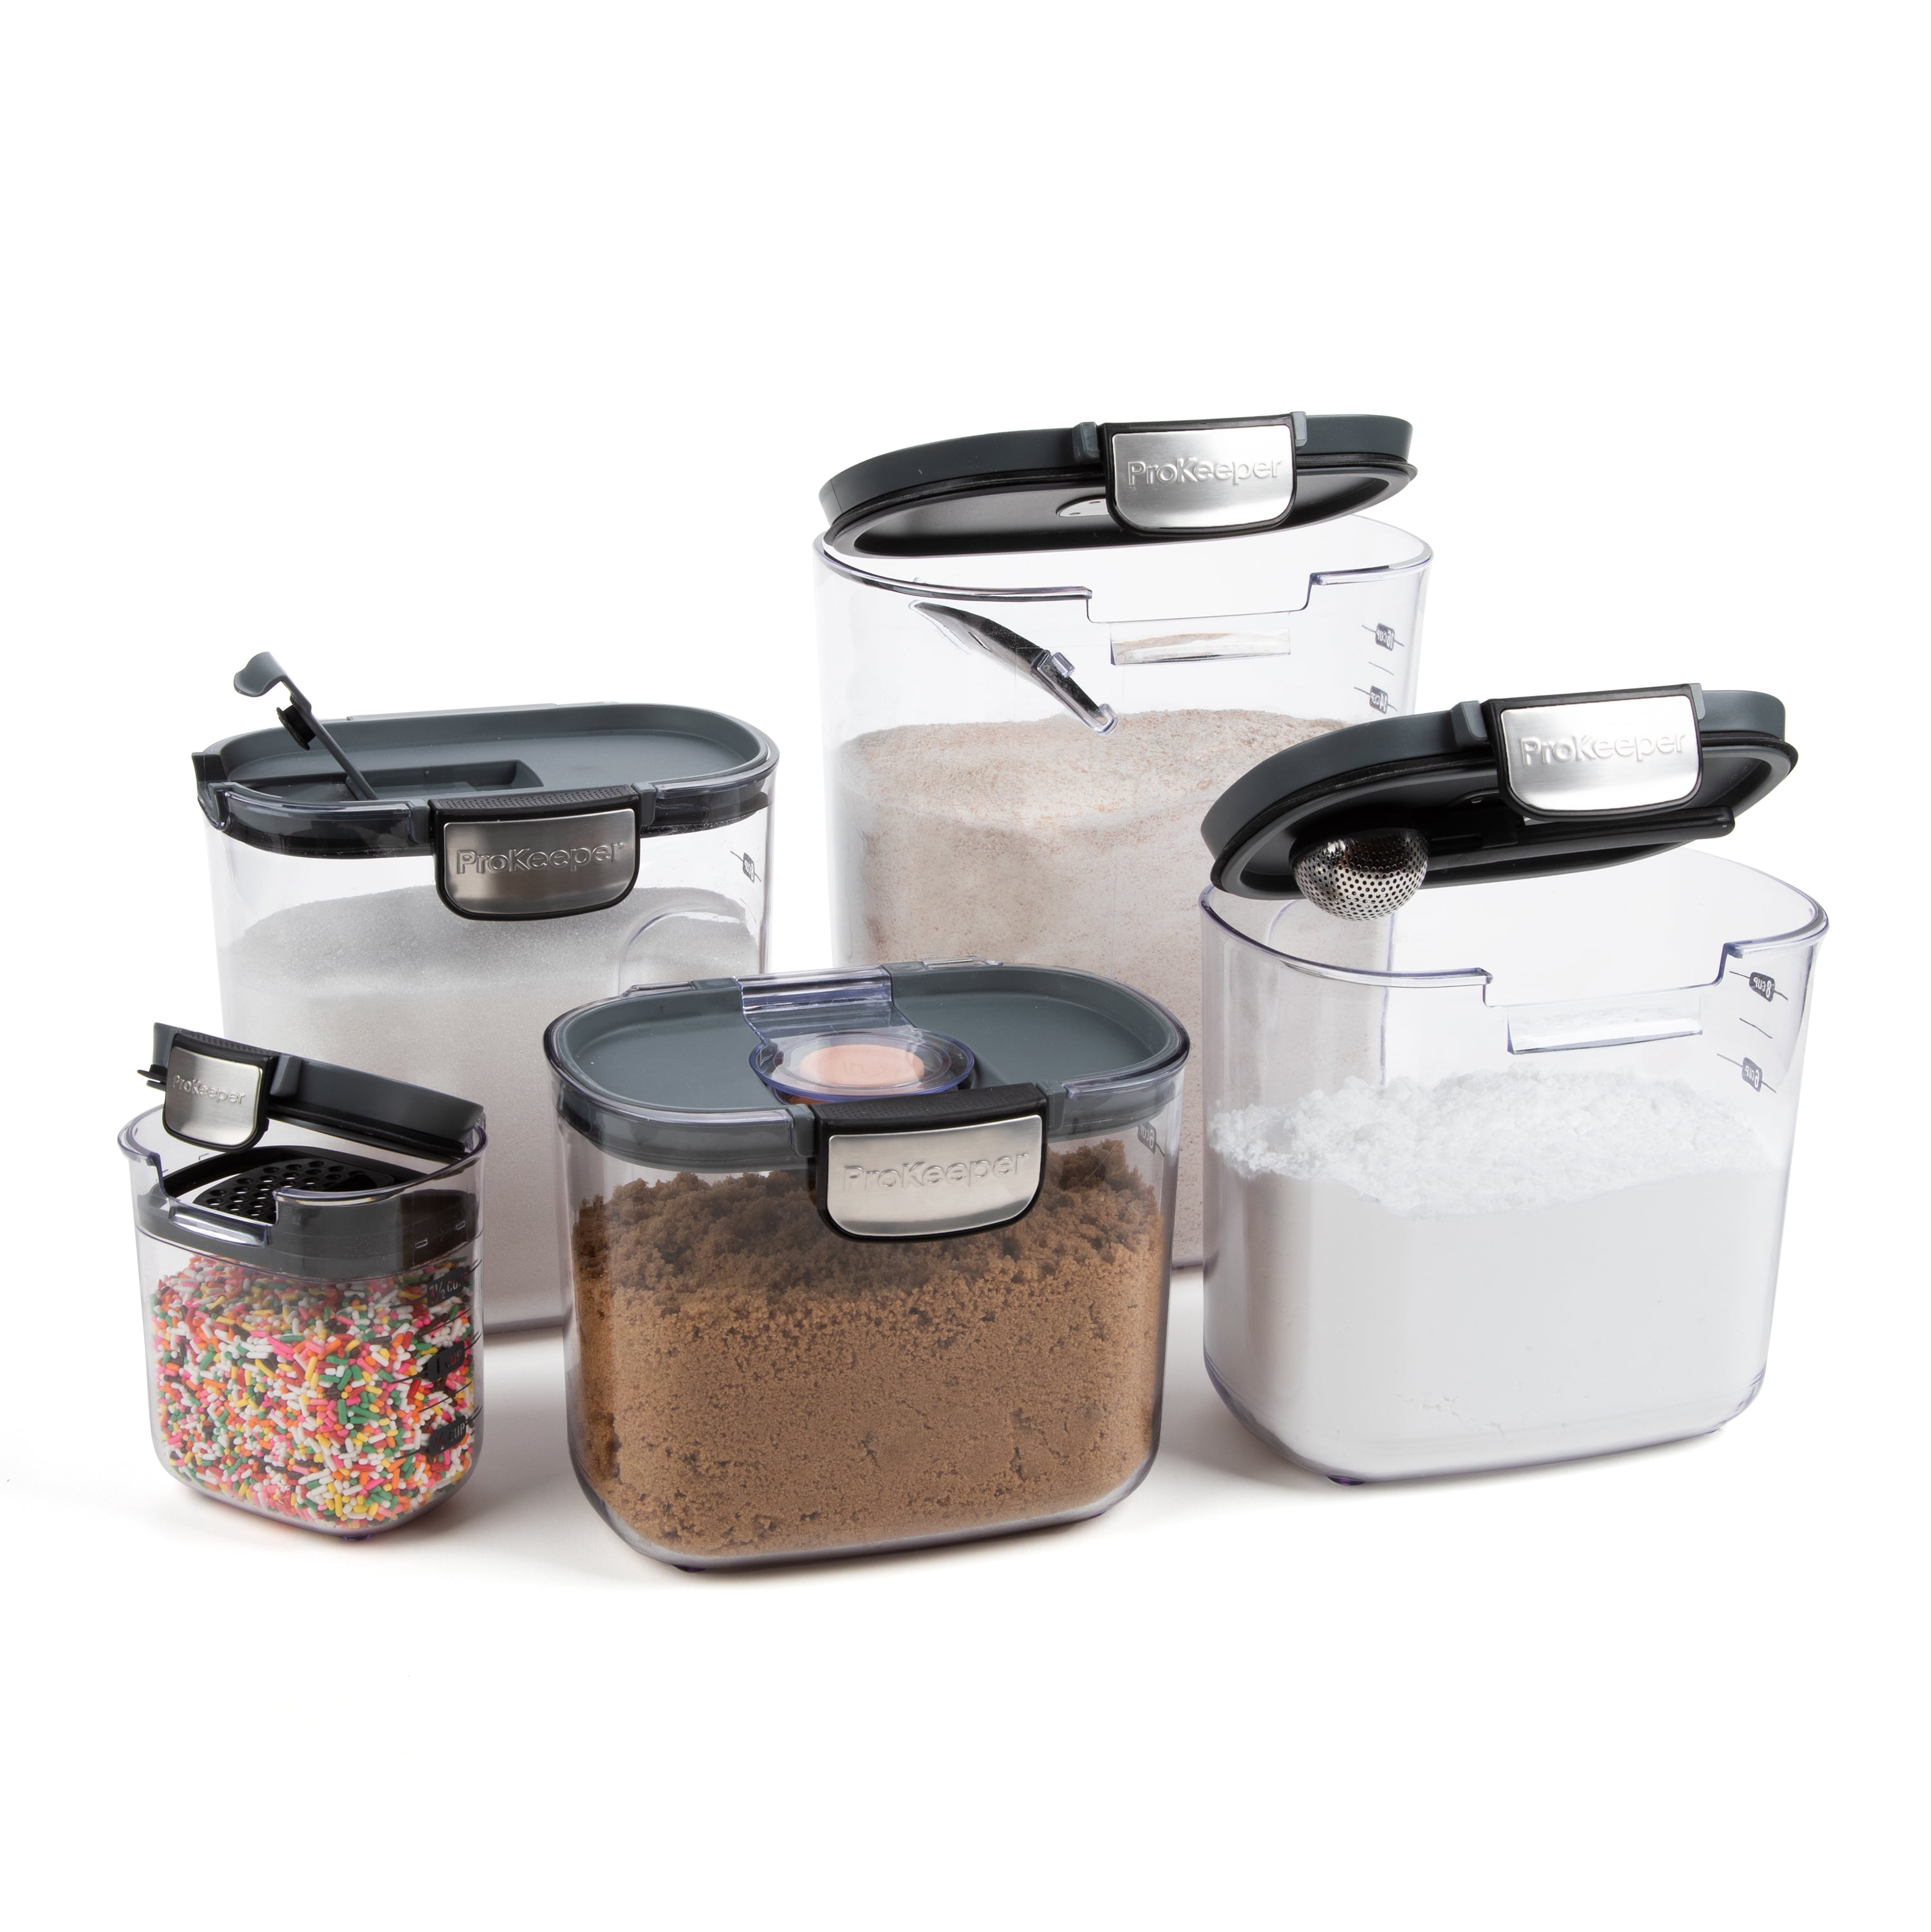 WOW! Lina's Fave Prokeeper Plus Storage Containers are Only $24.99 at  Costco!